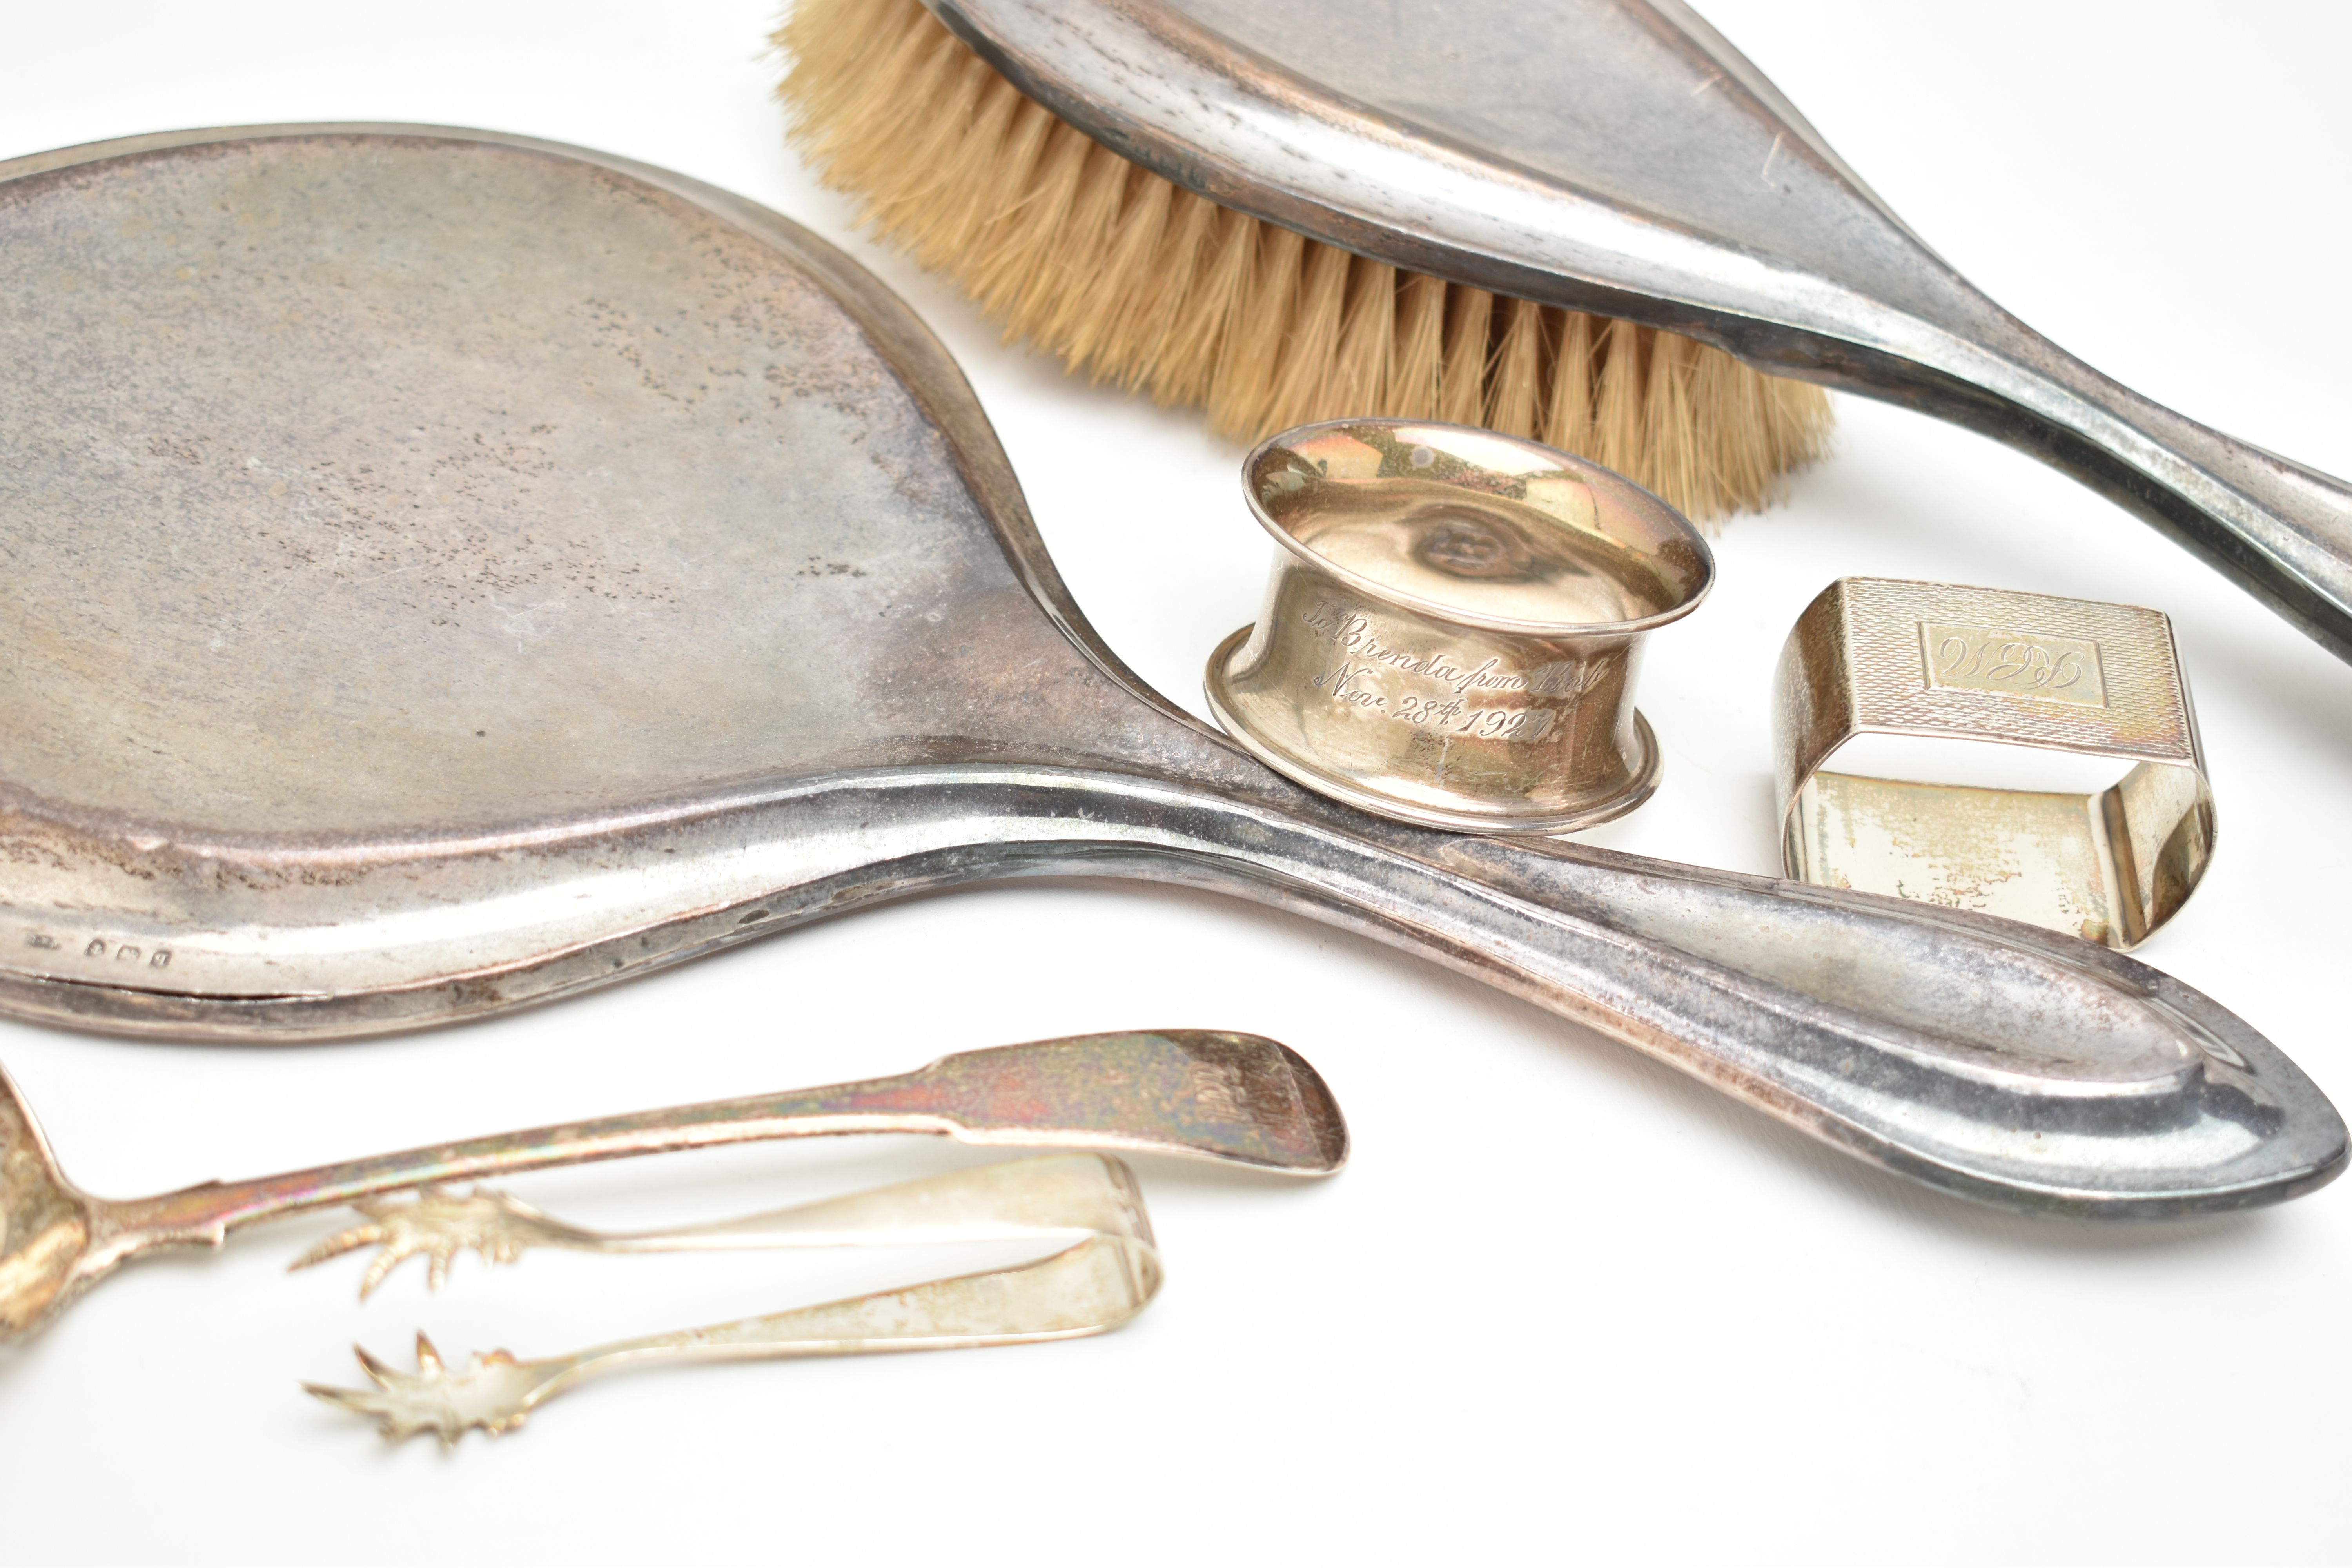 A SMALL ASSORTMENT OF SILVER, to include a hand held mirror and hair brush, hallmark rubbed - Image 2 of 3